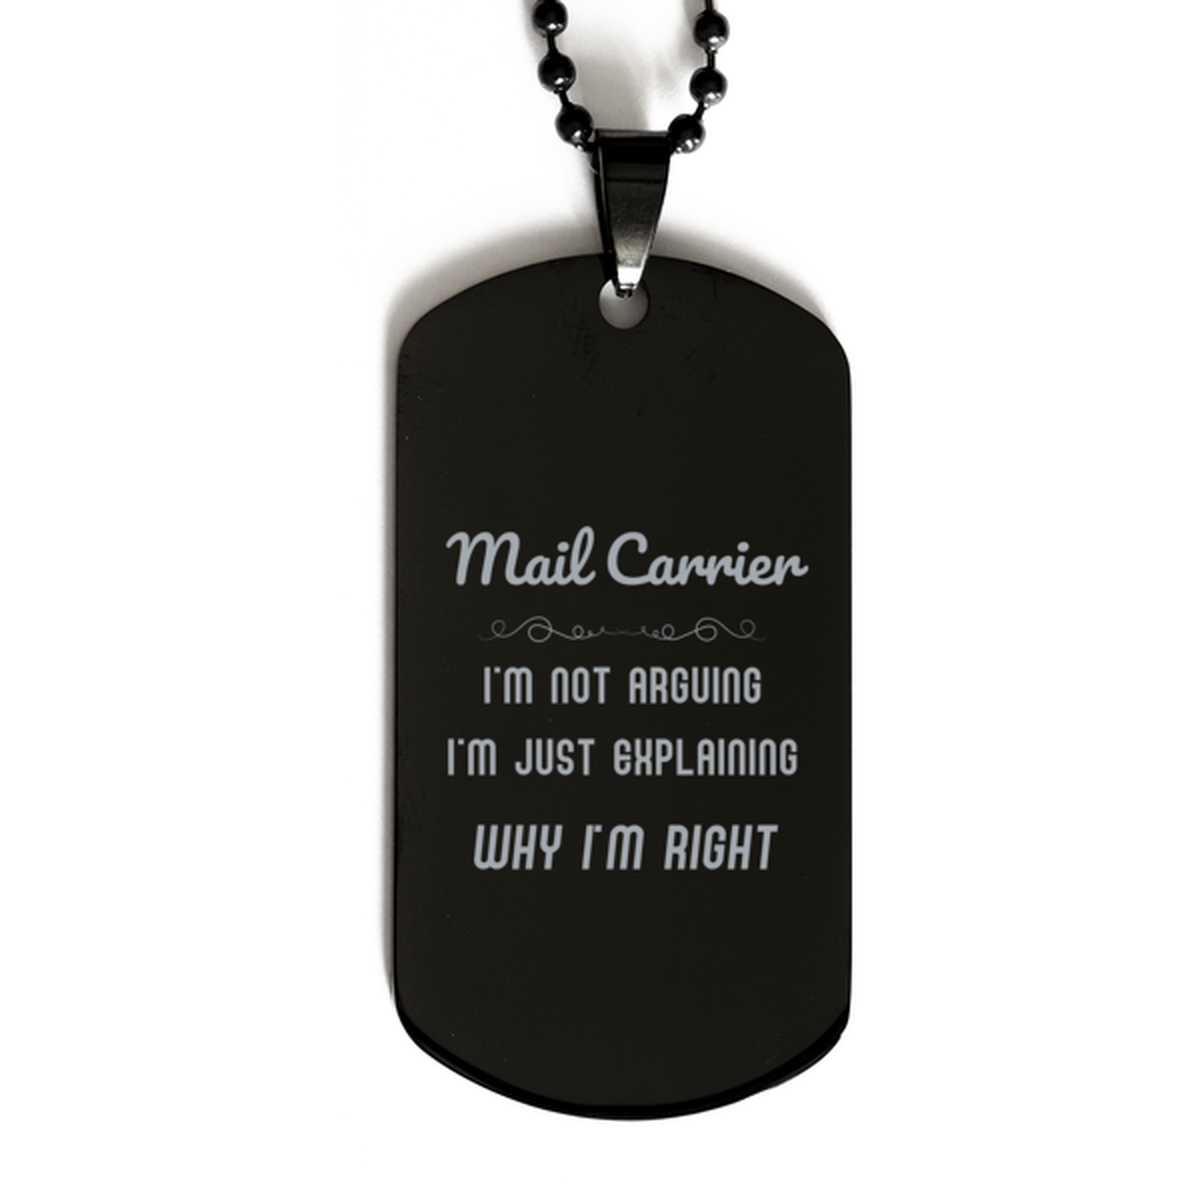 Mail Carrier I'm not Arguing. I'm Just Explaining Why I'm RIGHT Black Dog Tag, Funny Saying Quote Mail Carrier Gifts For Mail Carrier Graduation Birthday Christmas Gifts for Men Women Coworker